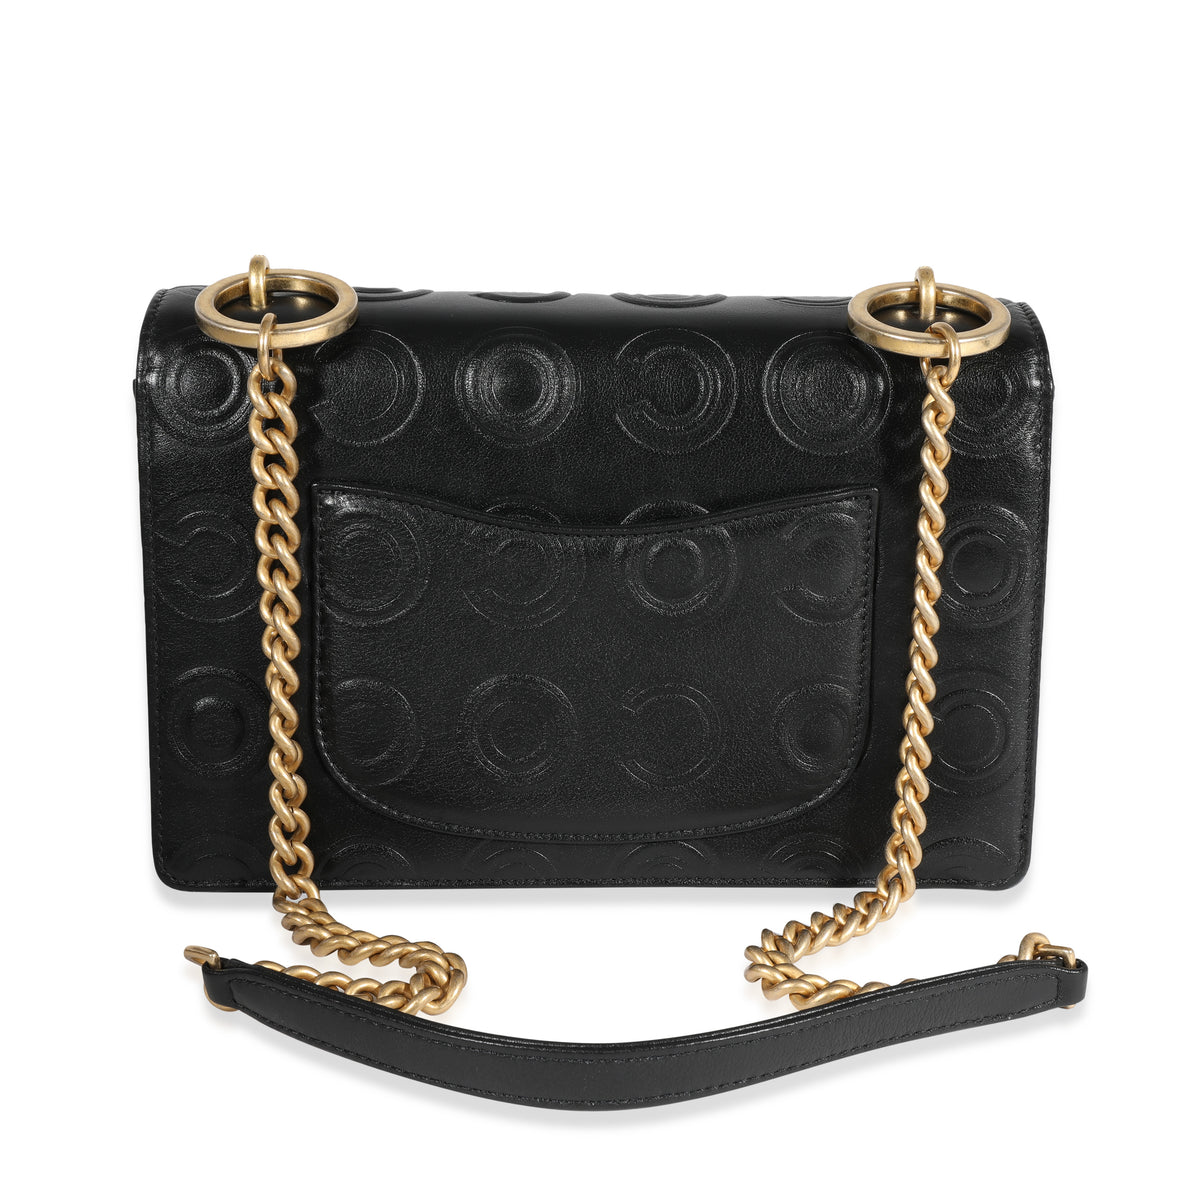 Coco luxe leather bag Chanel Black in Leather - 22571492